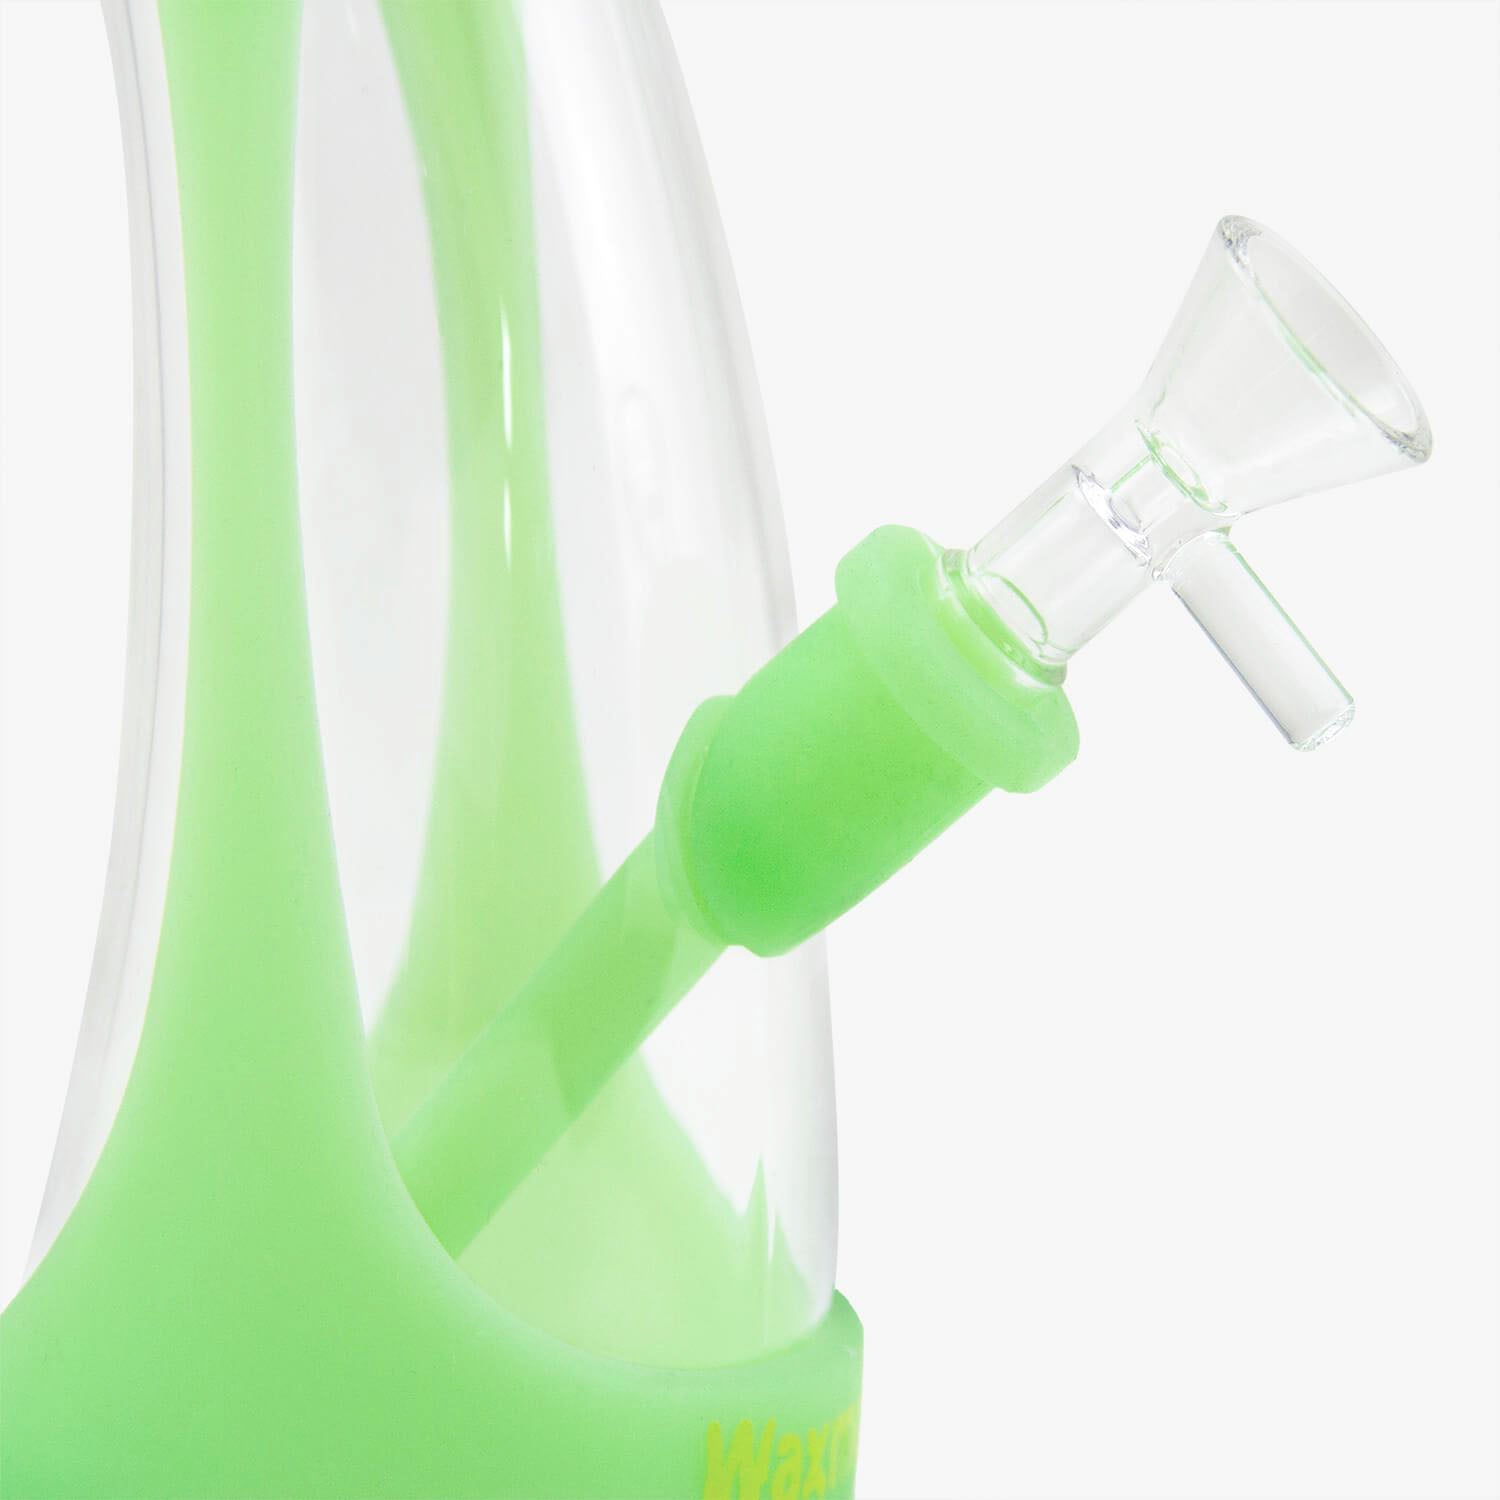 Glow In The Dark Silicone Bong - INHALCO